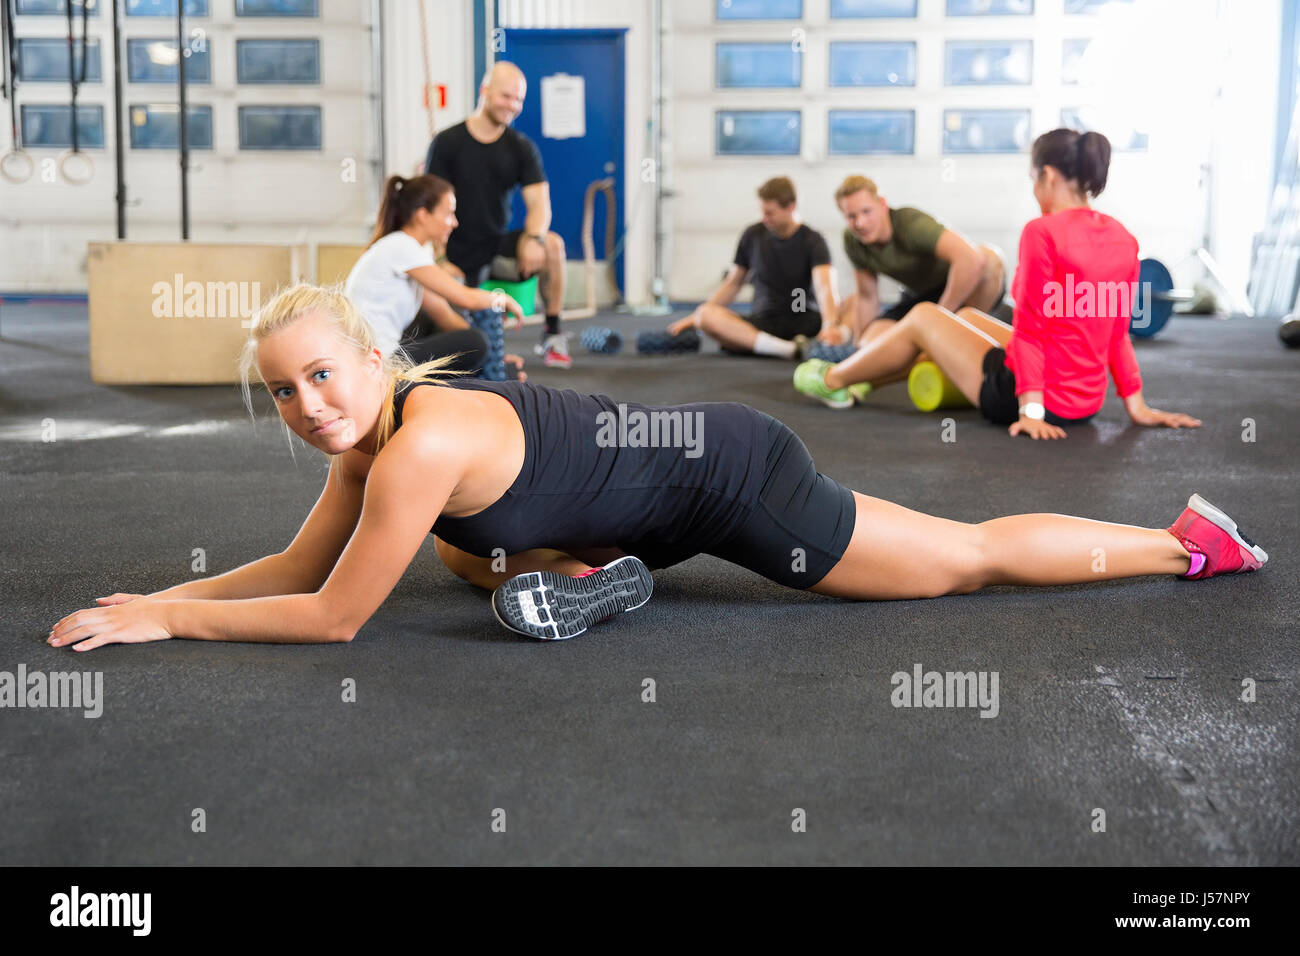 Determined Female Athlete Doing Stretching Exercise At Health Club Stock Photo